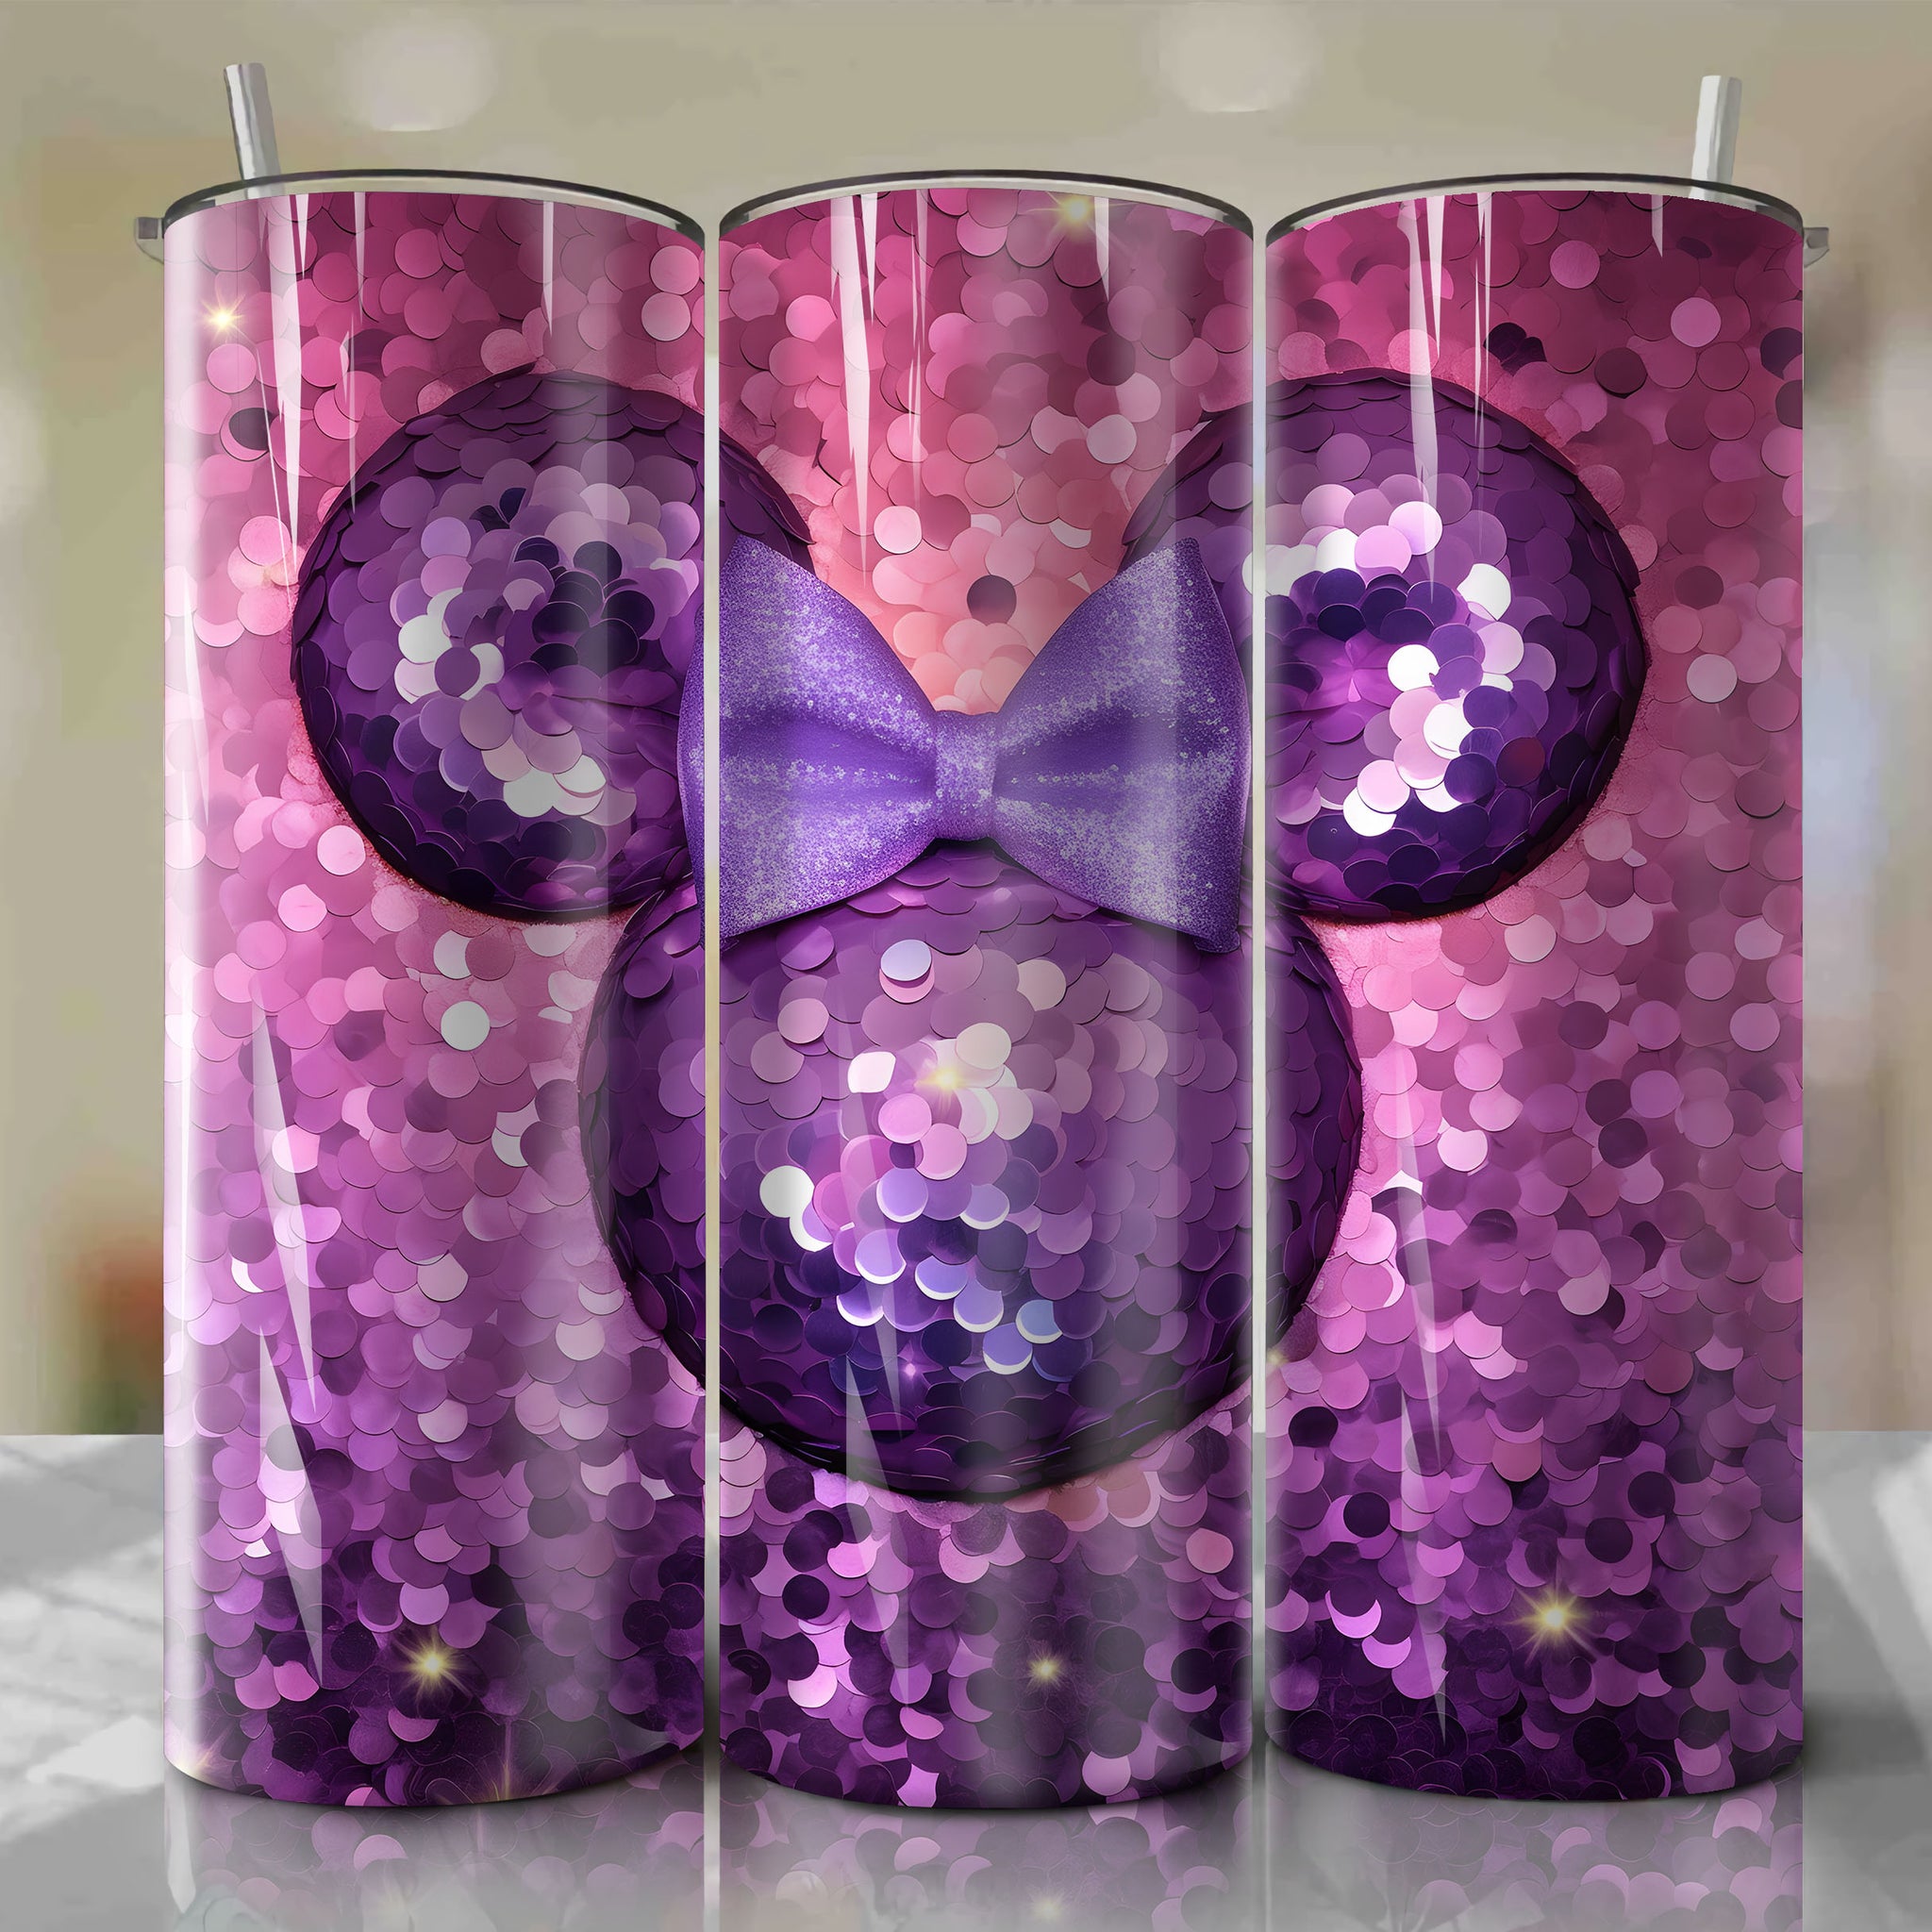 Festive 3D Bling Minnie Mouse Face Art - Digital Download for Sublimation Printing